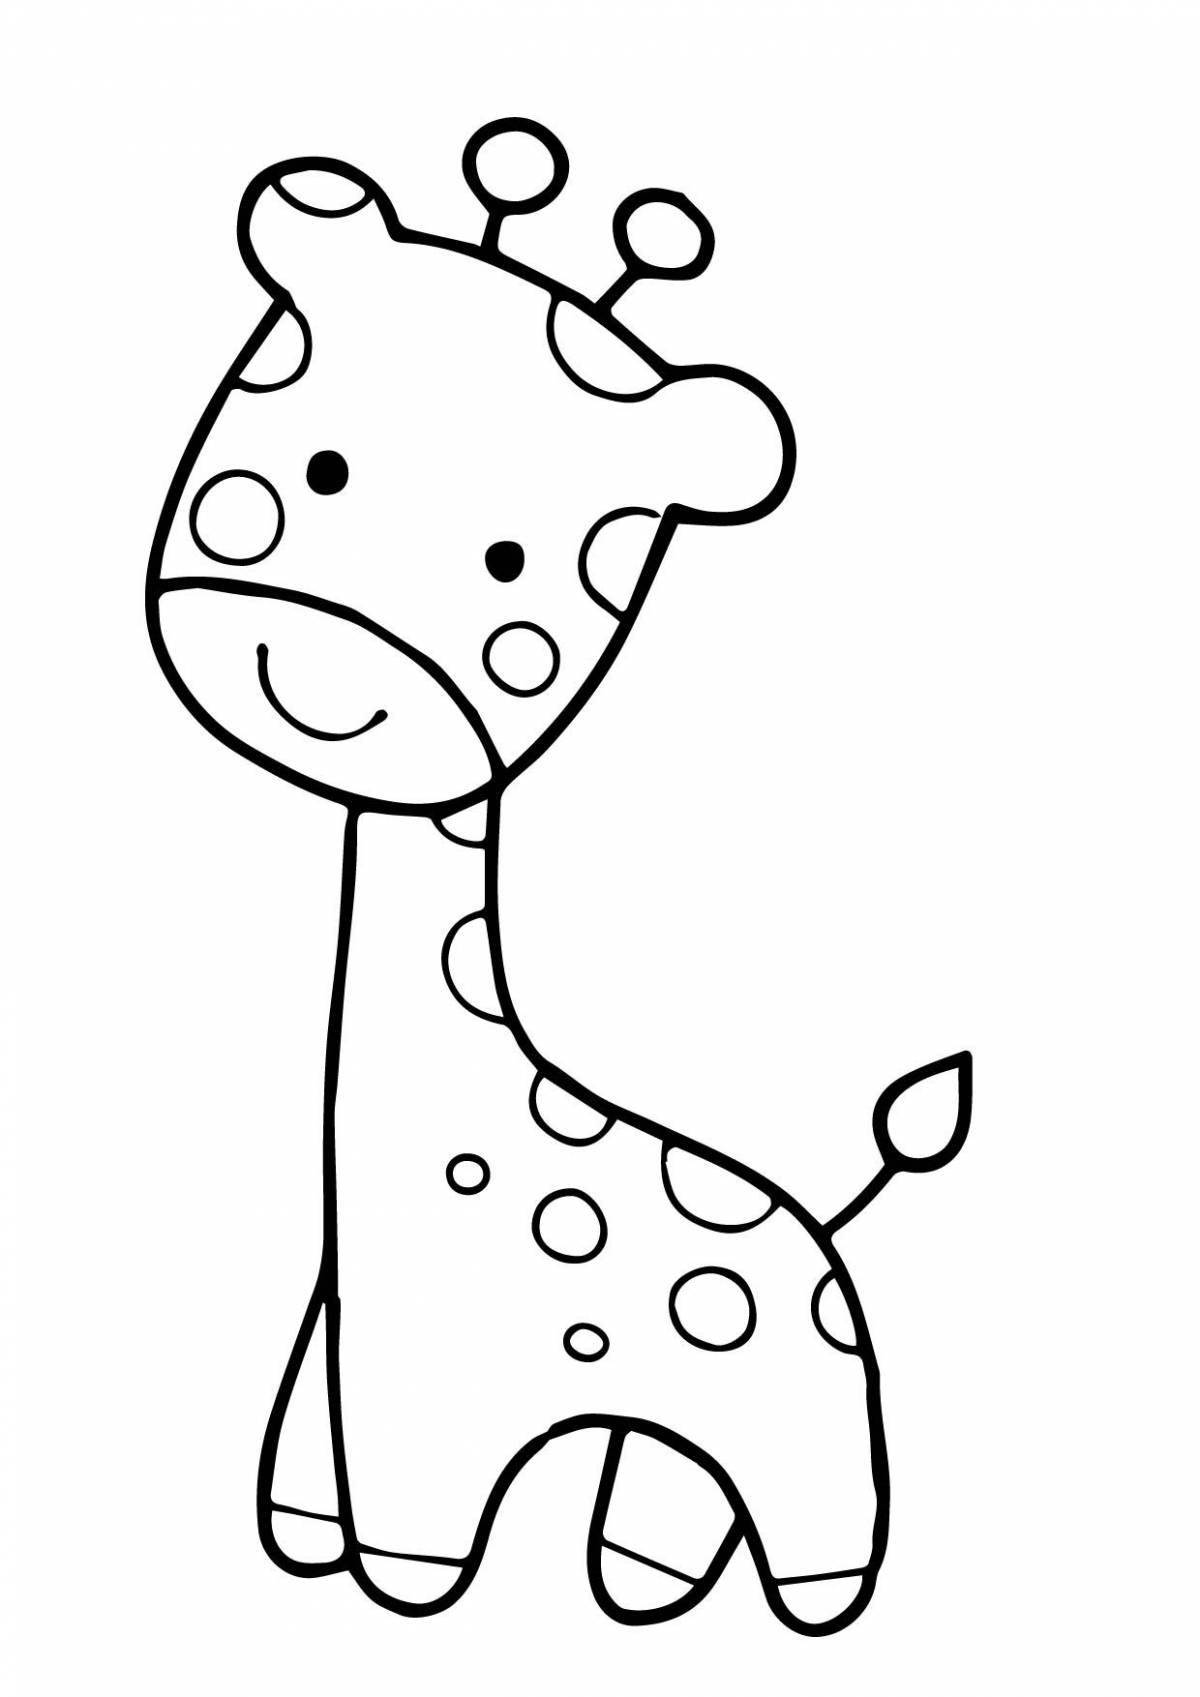 Incredible giraffe coloring book for kids 3-4 years old